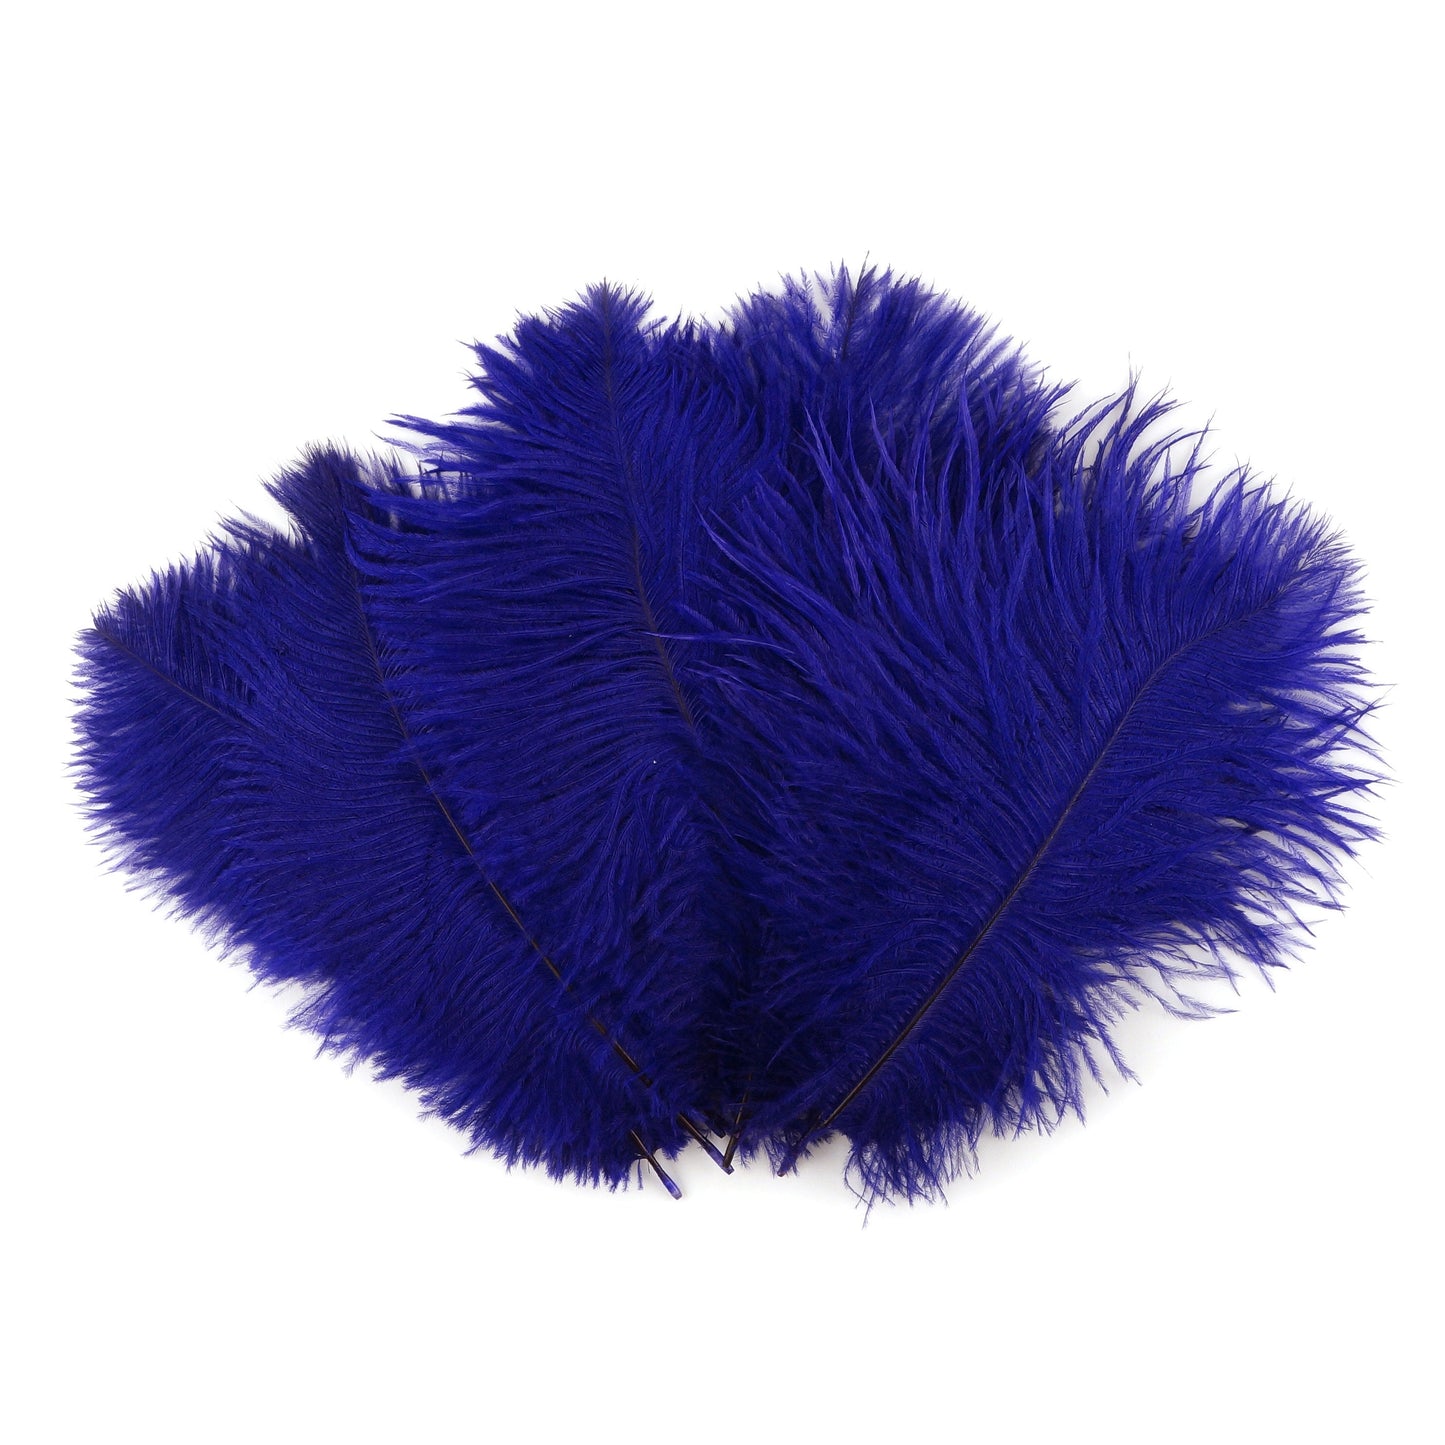 Ostrich Feathers 4-8" Drabs - Regal